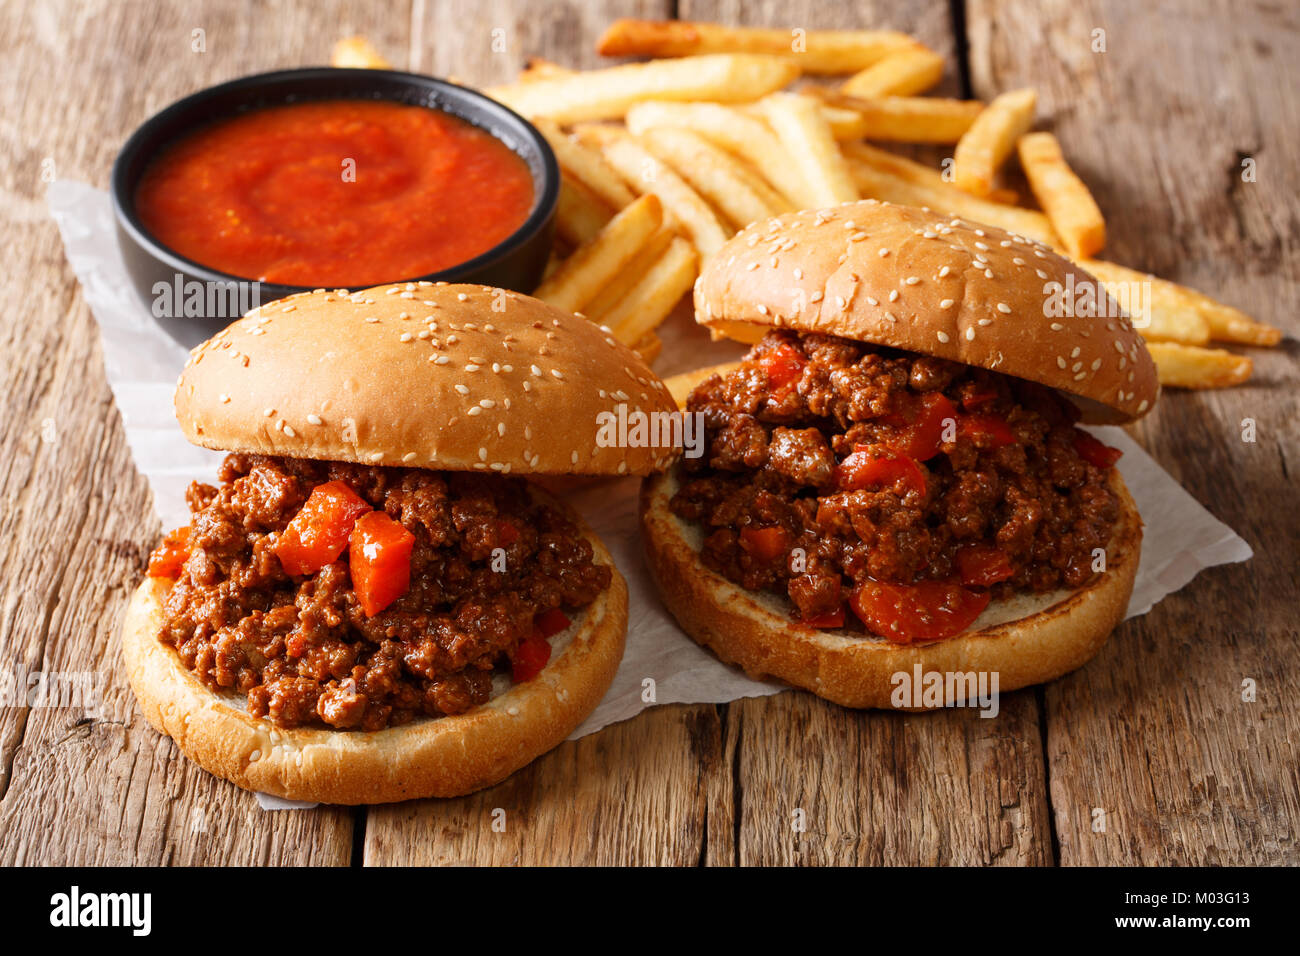 Homemade sandwiches with meat Sloppy Joe and french fries, ketchup closeup on the table. horizontal Stock Photo